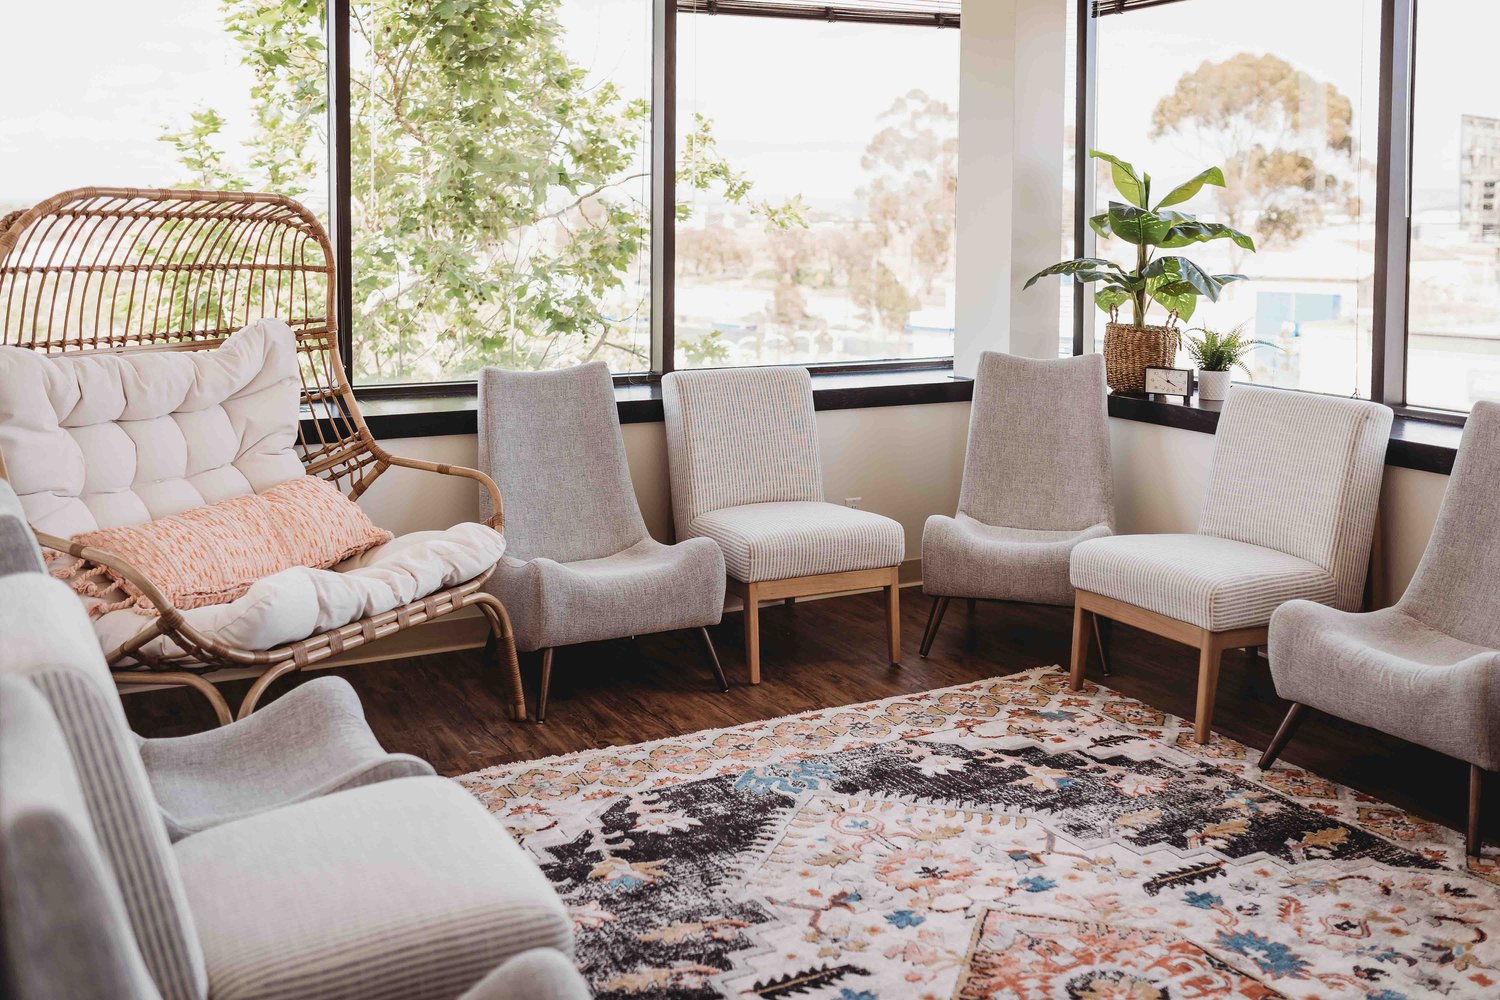 Group Therapy Room #1; many gray and white chairs and 1 wide brown wicker chair positioned in a circle in a well lit, sunny room. There is a large colorful rug on the floor